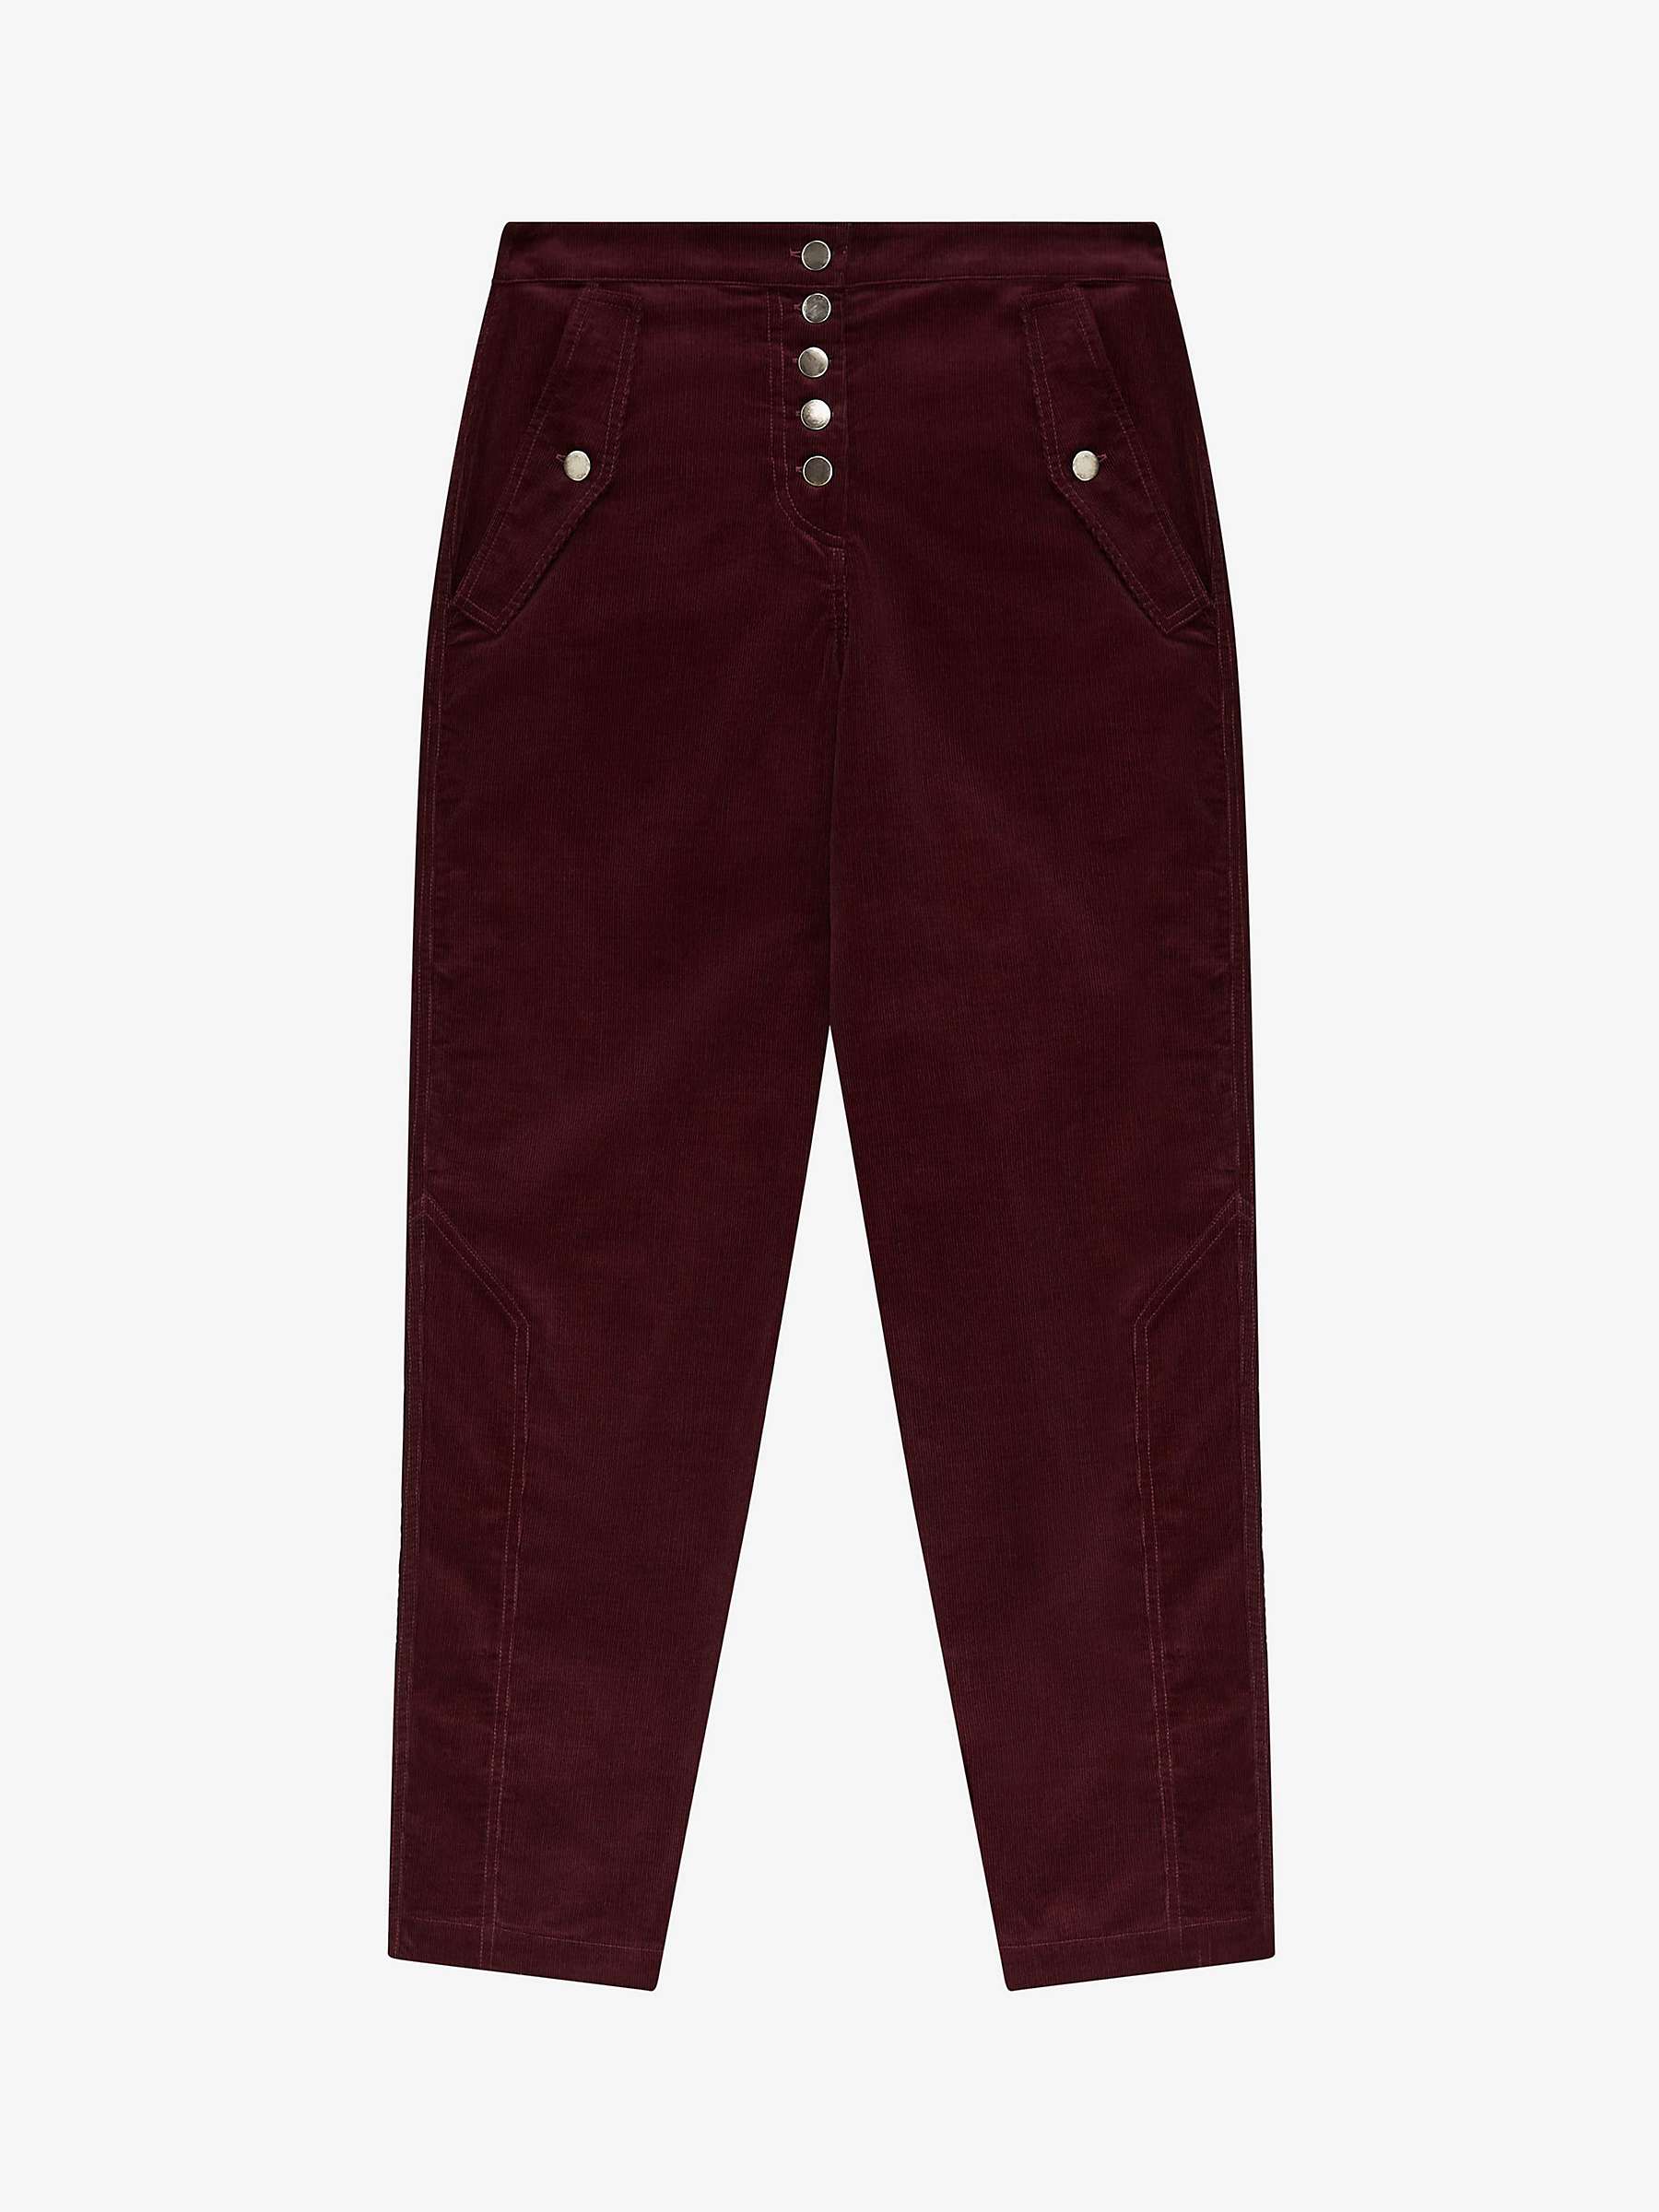 Buy Brora Needlecord Utility Trousers Online at johnlewis.com